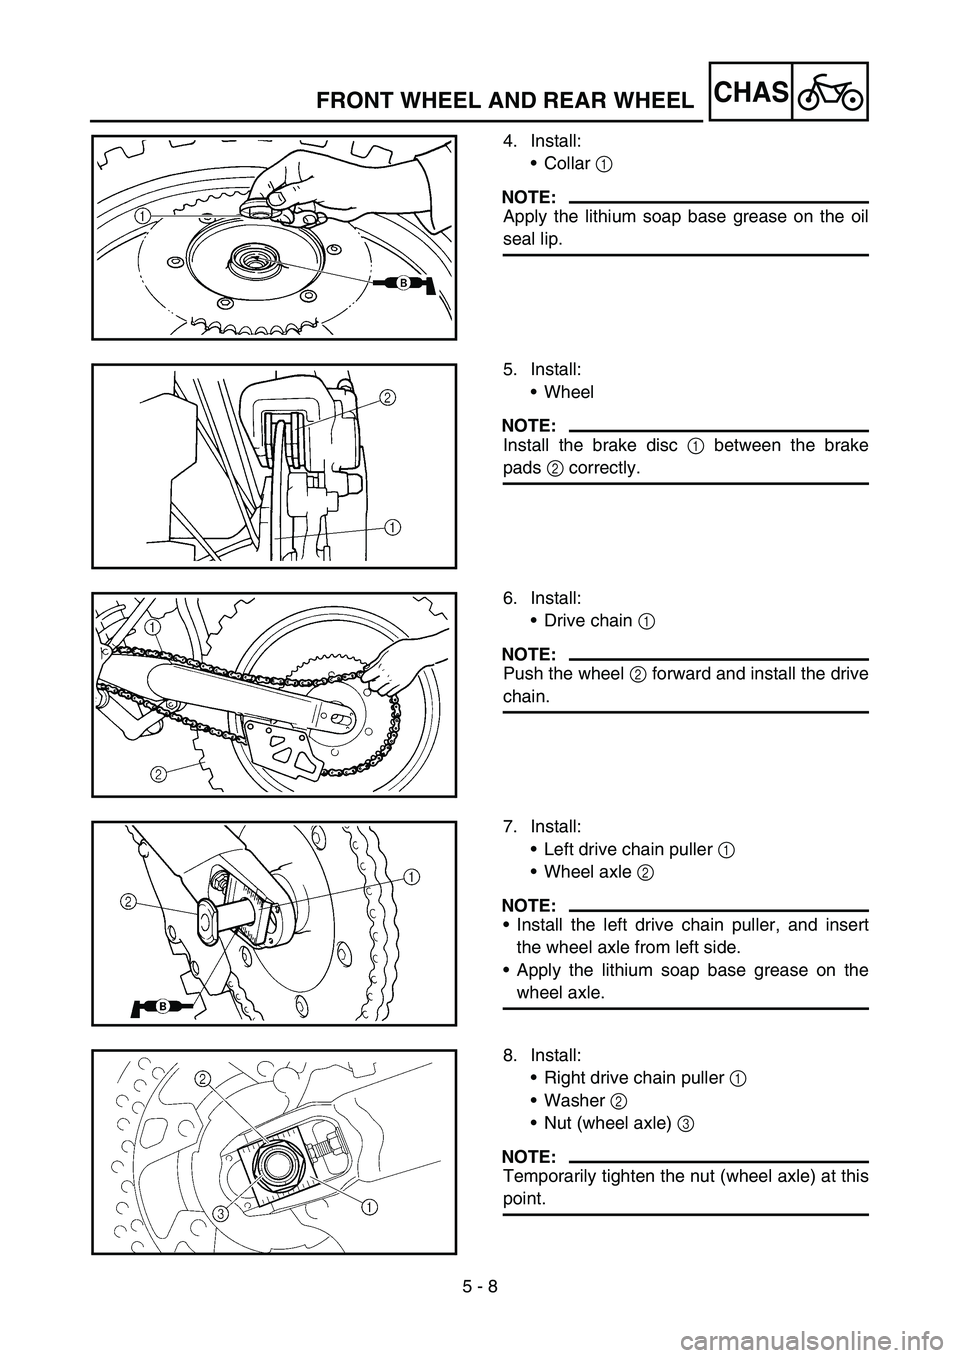 YAMAHA YZ250F 2007  Owners Manual 5 - 8
CHAS
4. Install:
Collar 1 
NOTE:
Apply the lithium soap base grease on the oil
seal lip.
FRONT WHEEL AND REAR WHEEL
5. Install:
Wheel
NOTE:
Install the brake disc 1 between the brake
pads 2 co